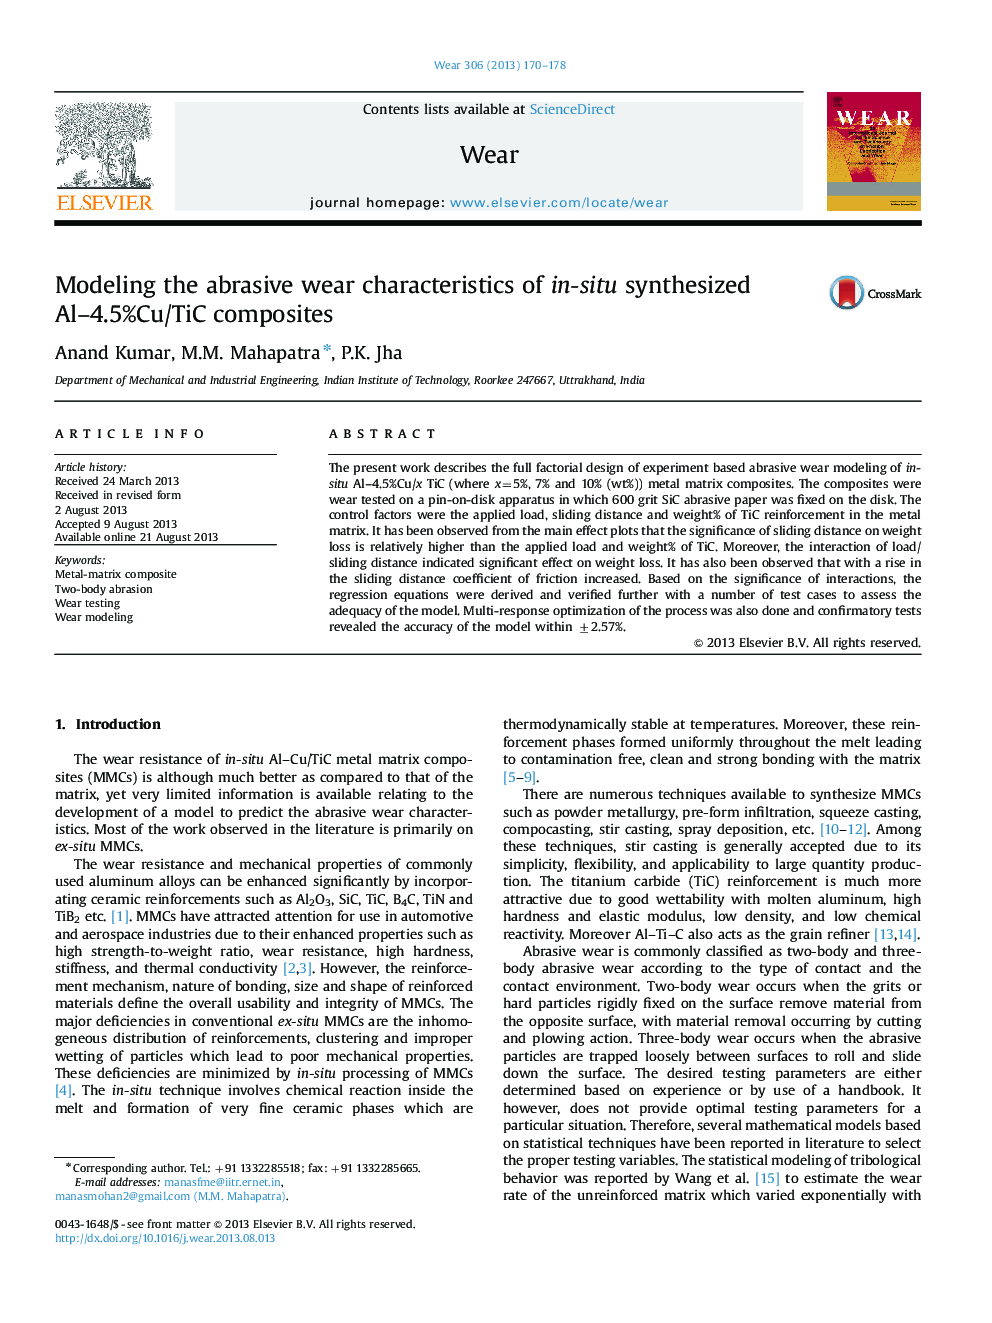 Modeling the abrasive wear characteristics of in-situ synthesized Al–4.5%Cu/TiC composites